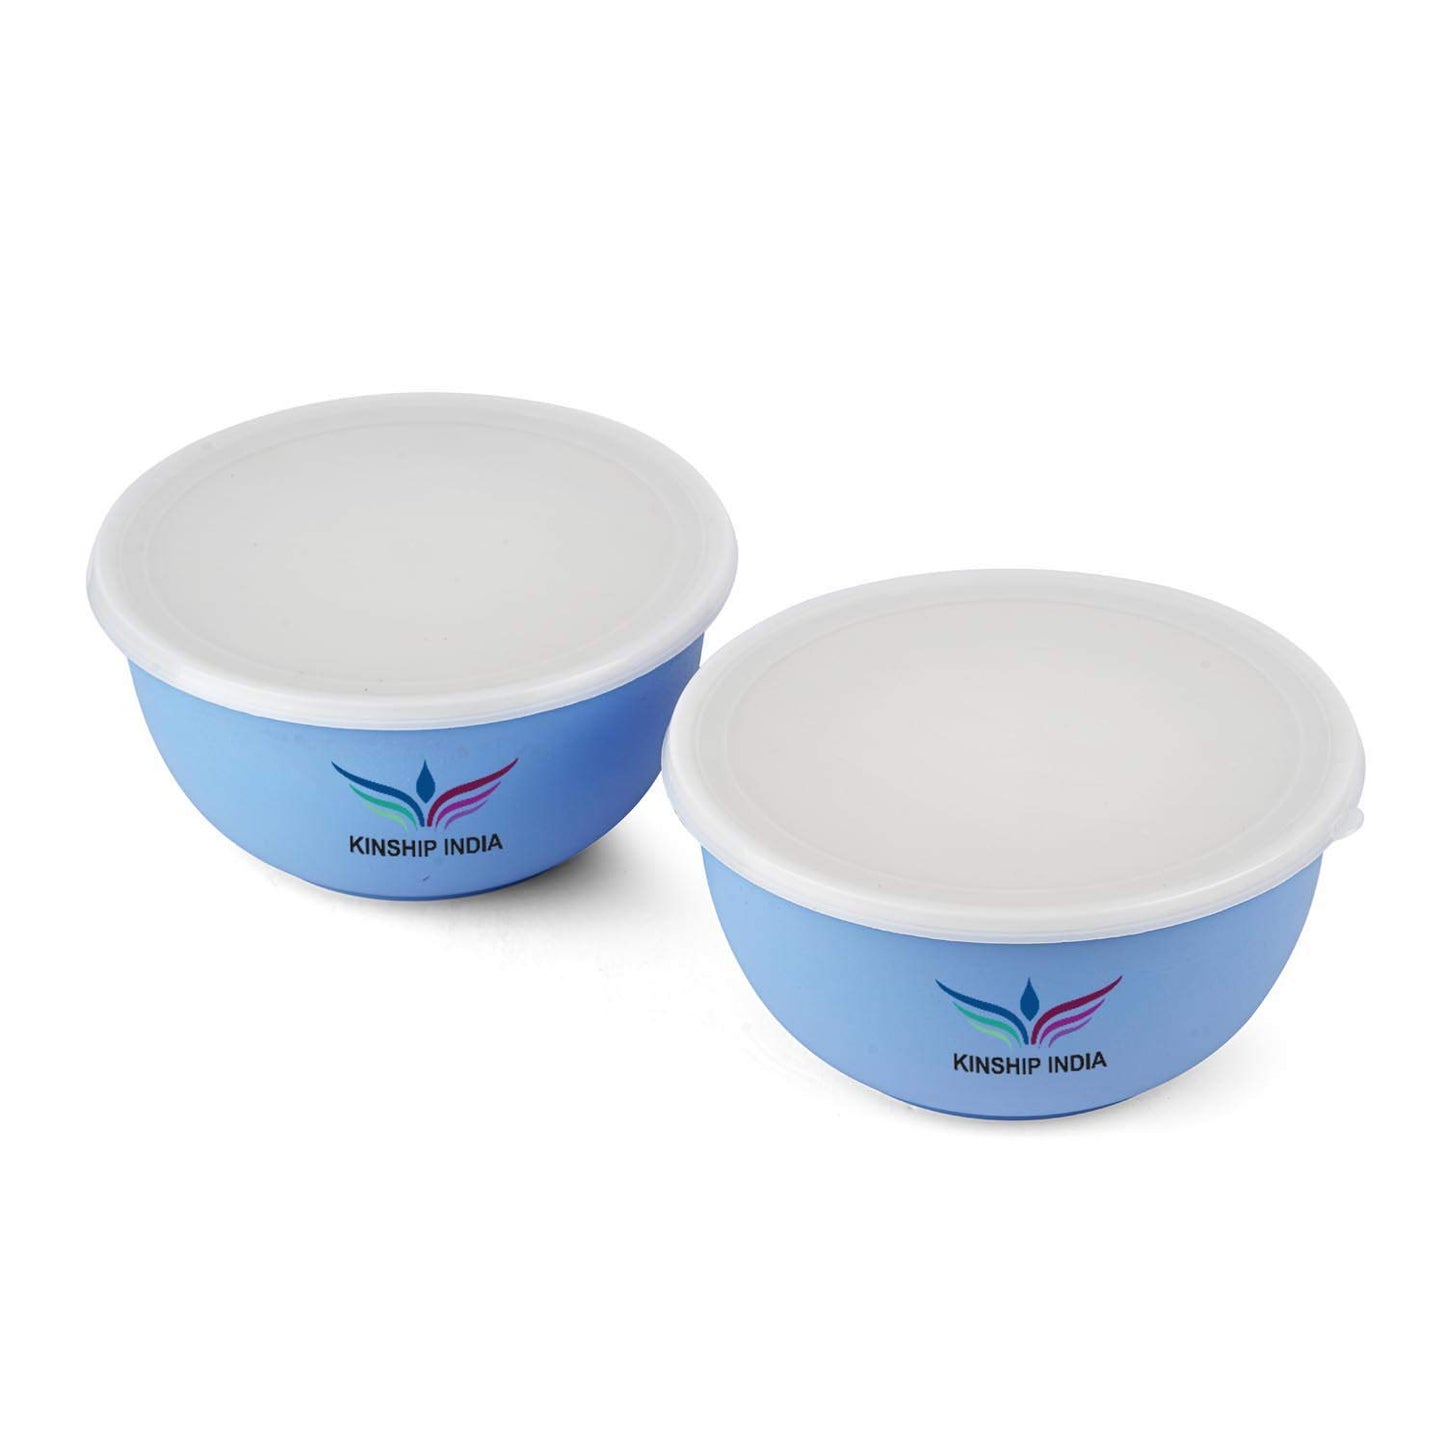 Microwave Safe Stainless Steel Plastic Coated Euro Bowl (2000 ml) (BLUE) Set of 2